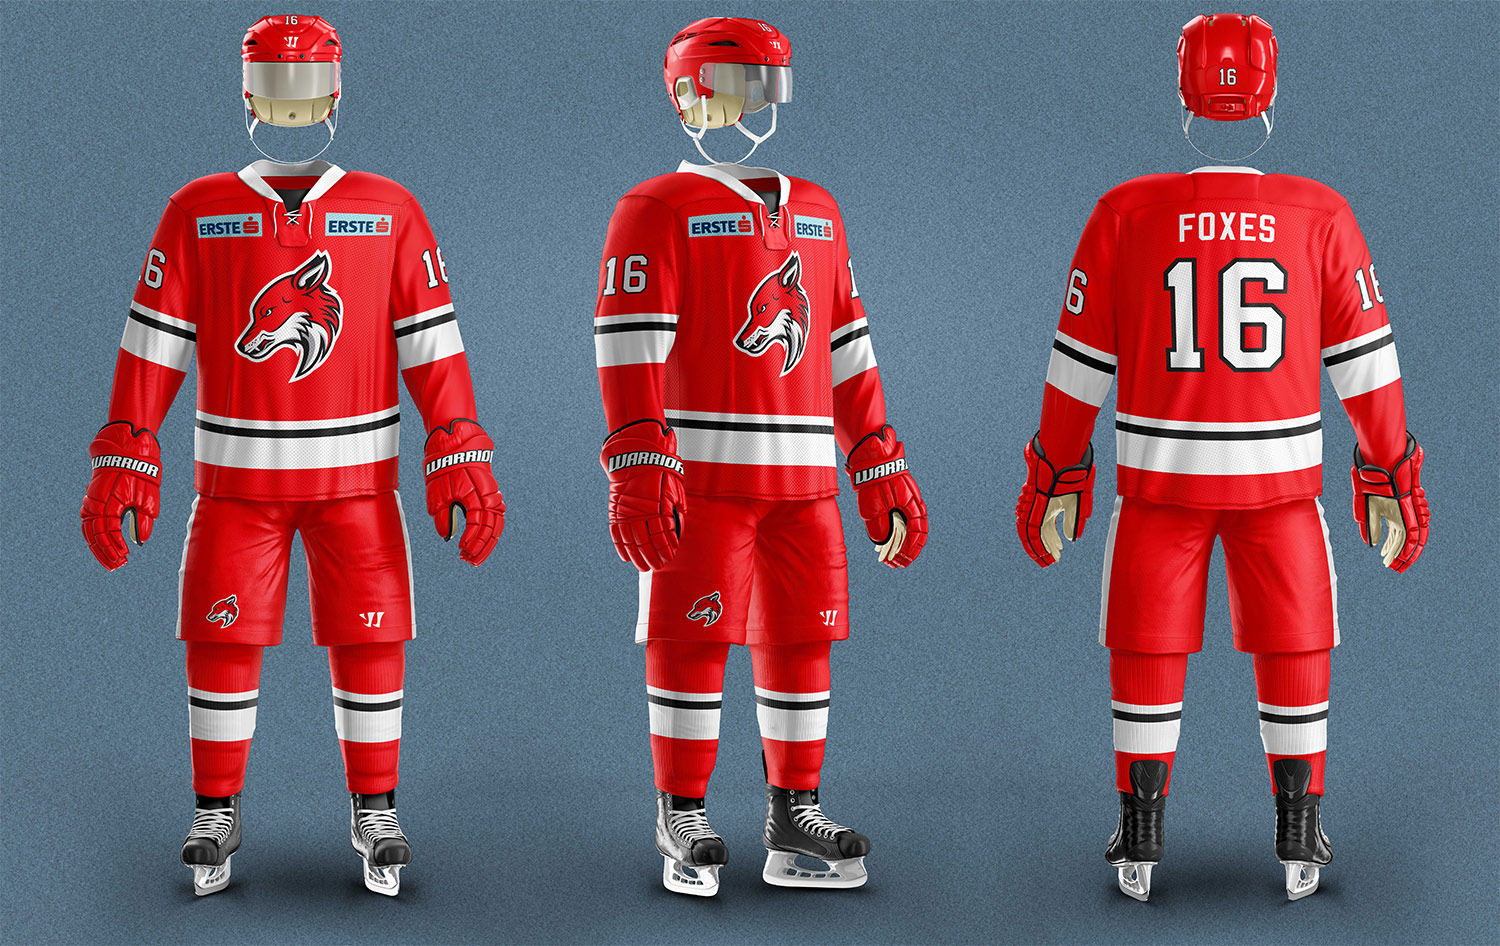 HCB_Foxes_Full-Player-Red.jpg